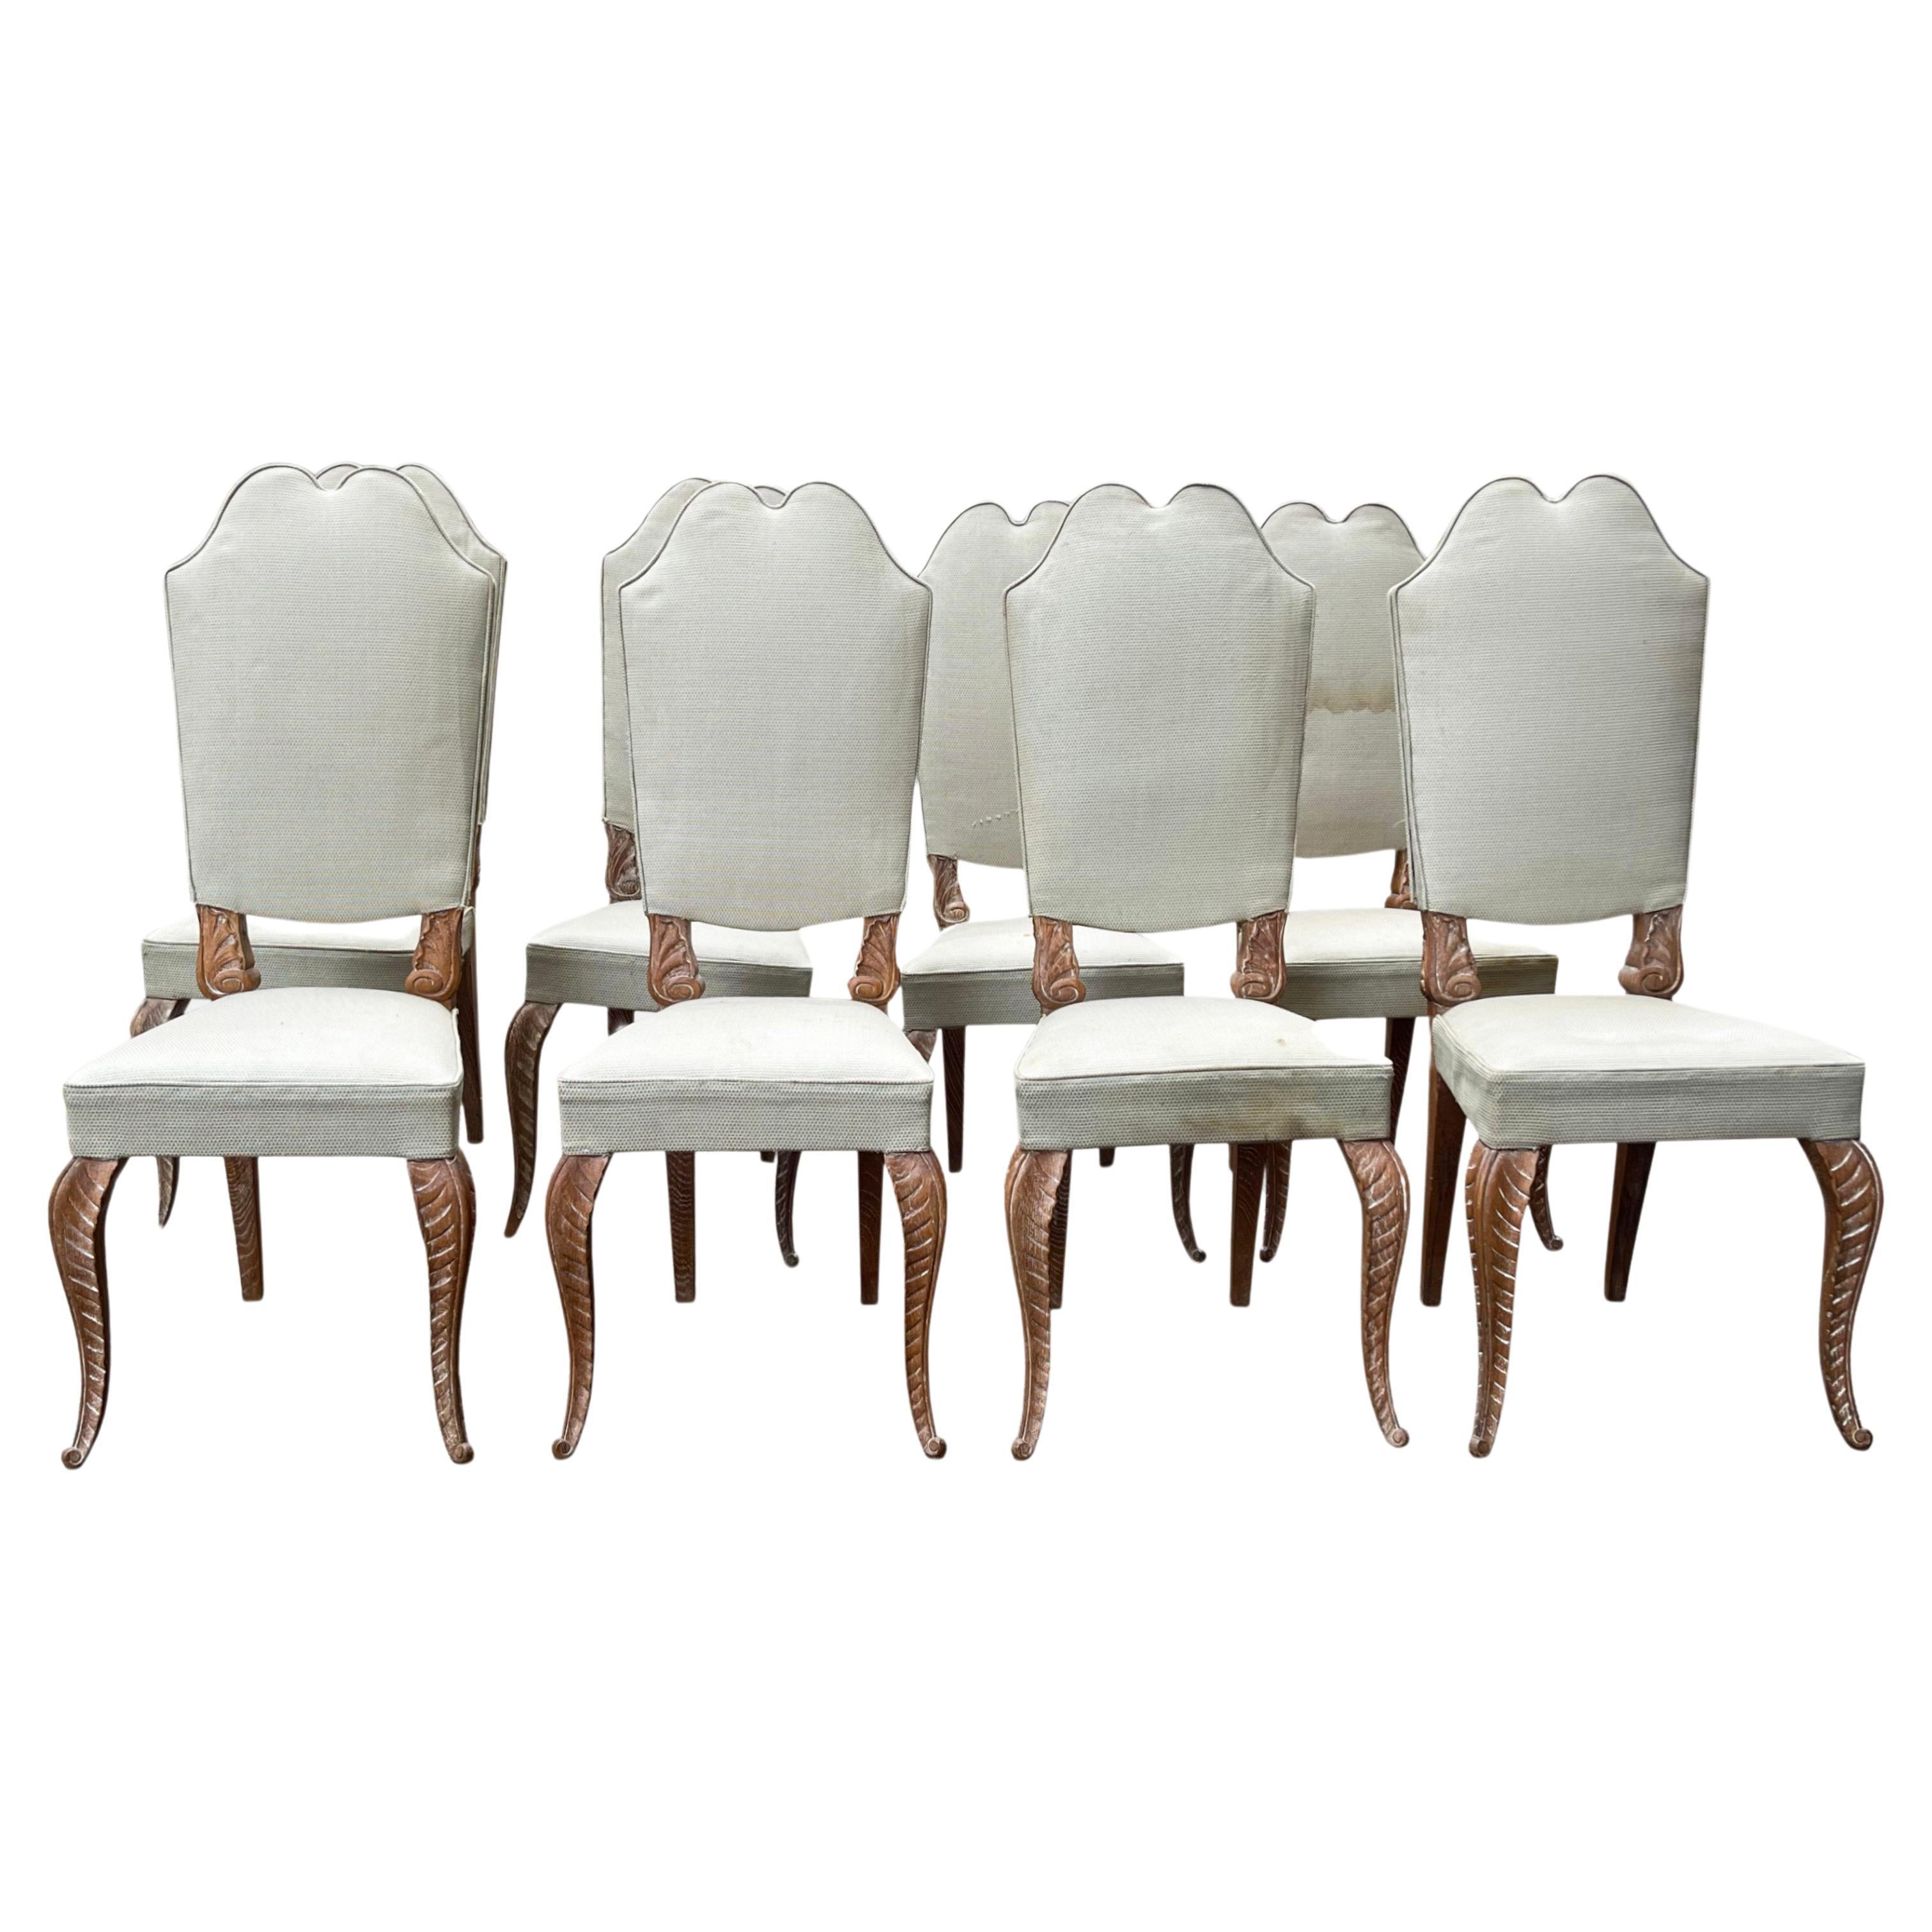 Set of Eight 1940s French Dining Chairs by Maison Jansen